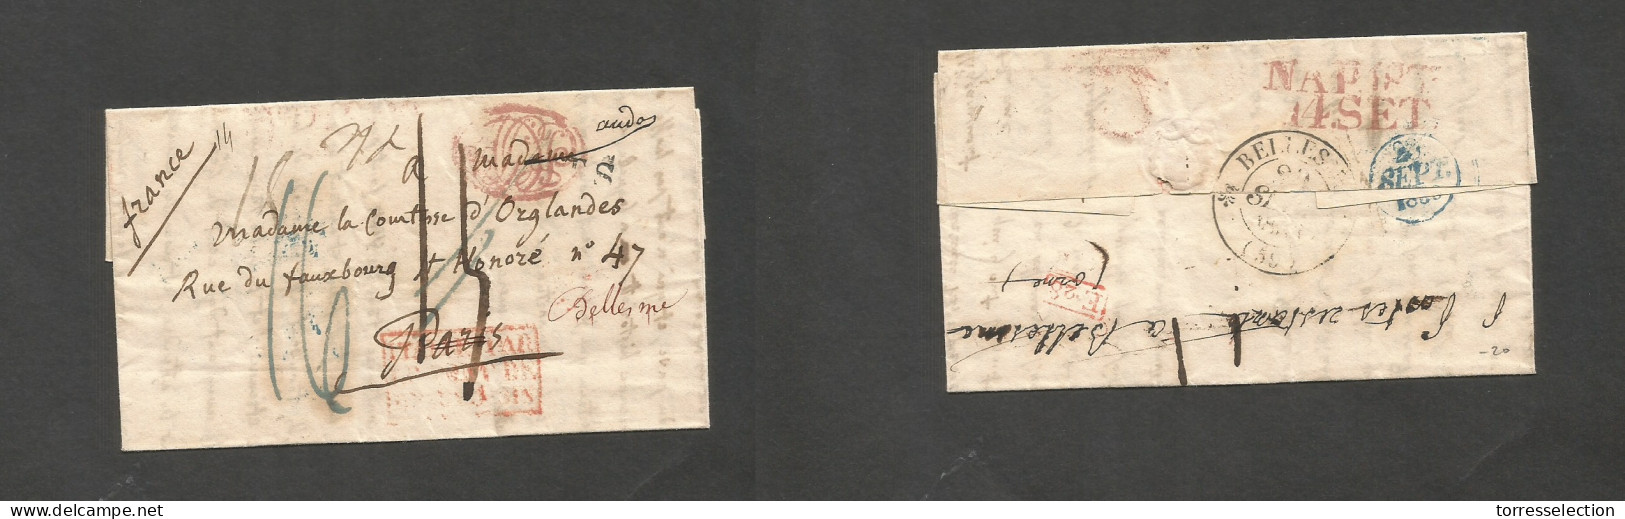 Italy - Prephilately. 1833 (14 Sept) Napoli - France, Paris, Fwded (29 Sept) Bellesme. Stampless E. With Text Several Tr - Sin Clasificación